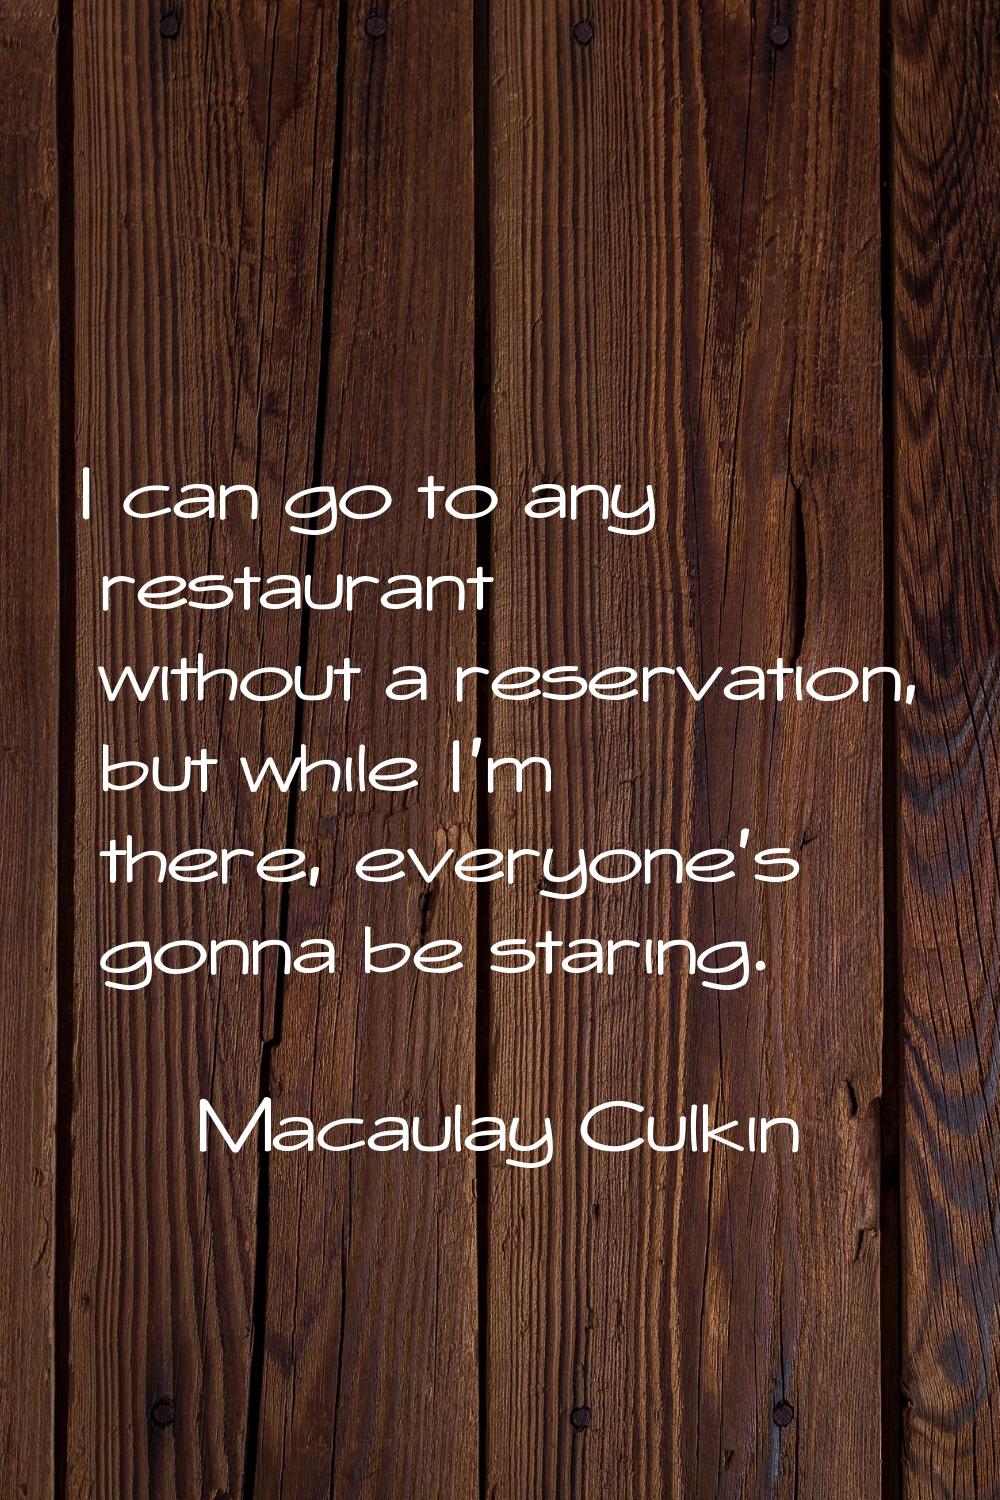 I can go to any restaurant without a reservation, but while I'm there, everyone's gonna be staring.